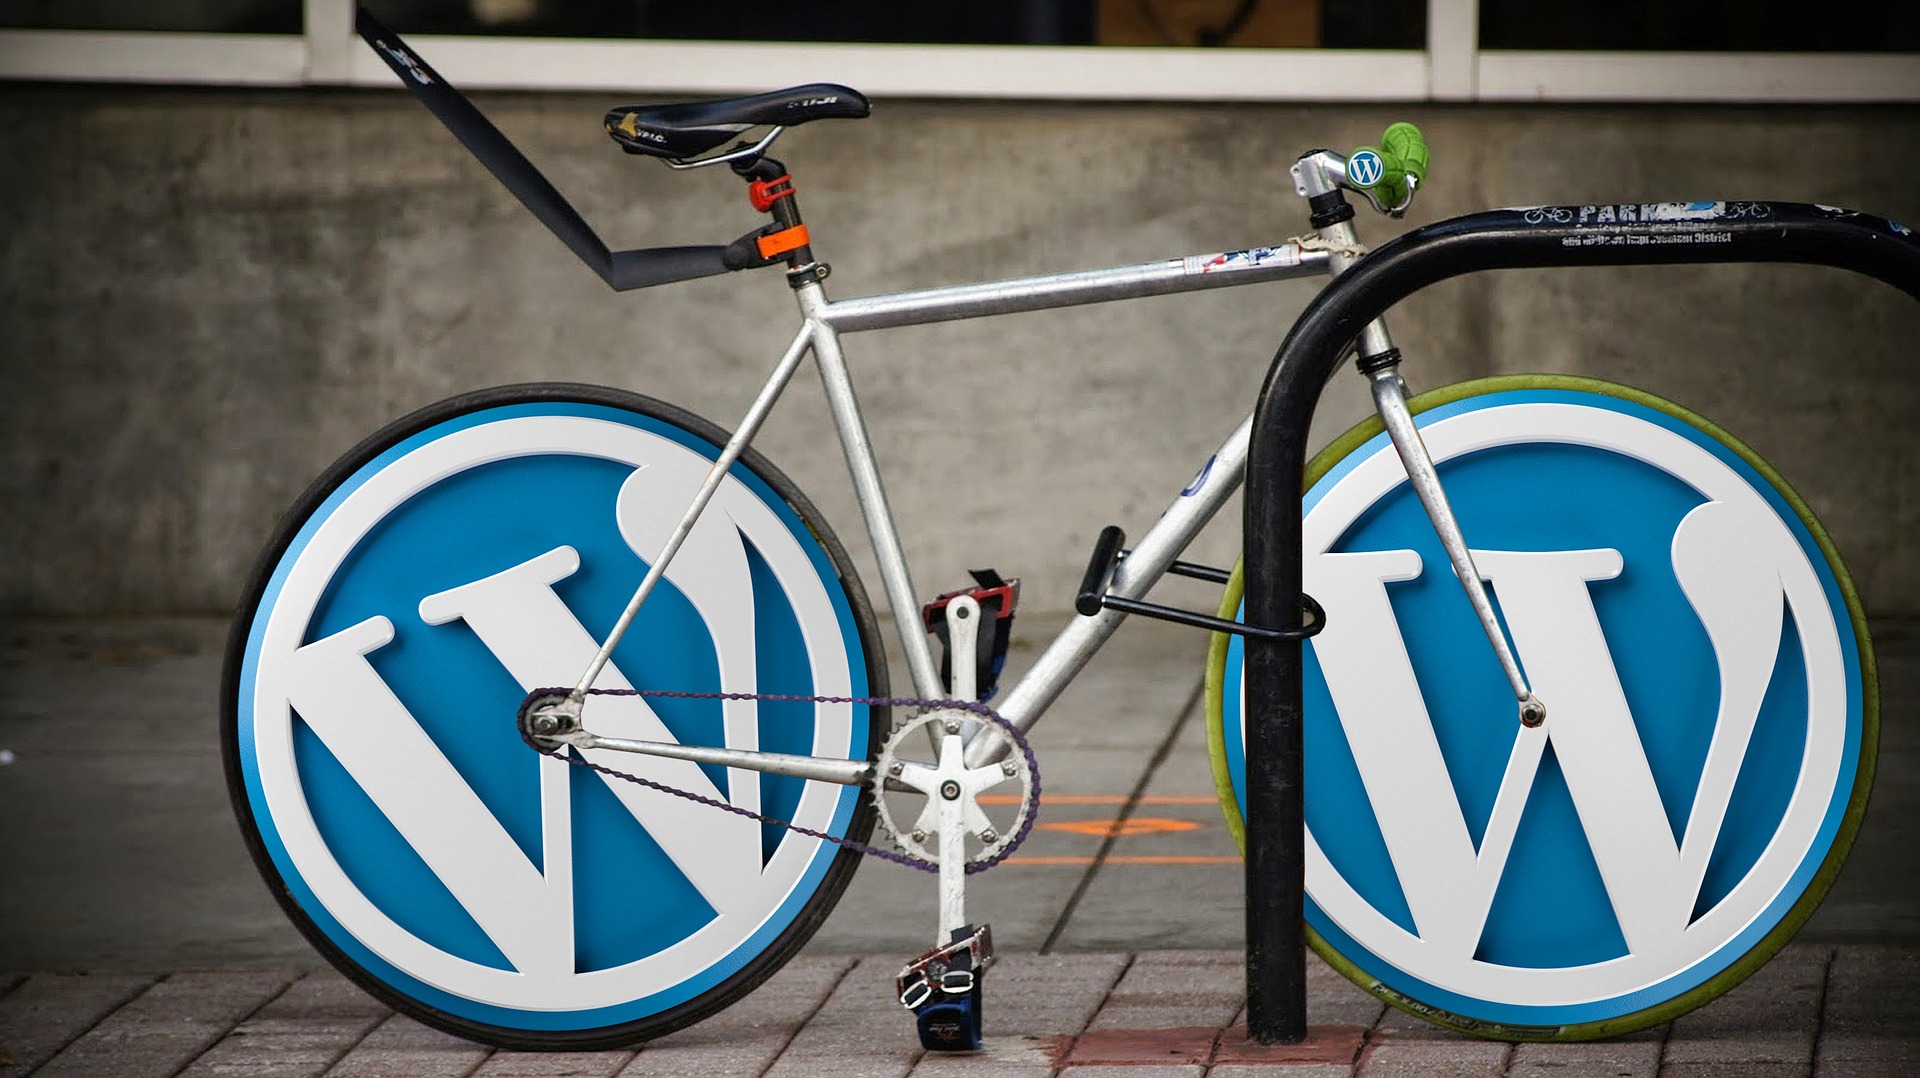 WordPress vs Wix: Which Do You Think is Better for Your Project?